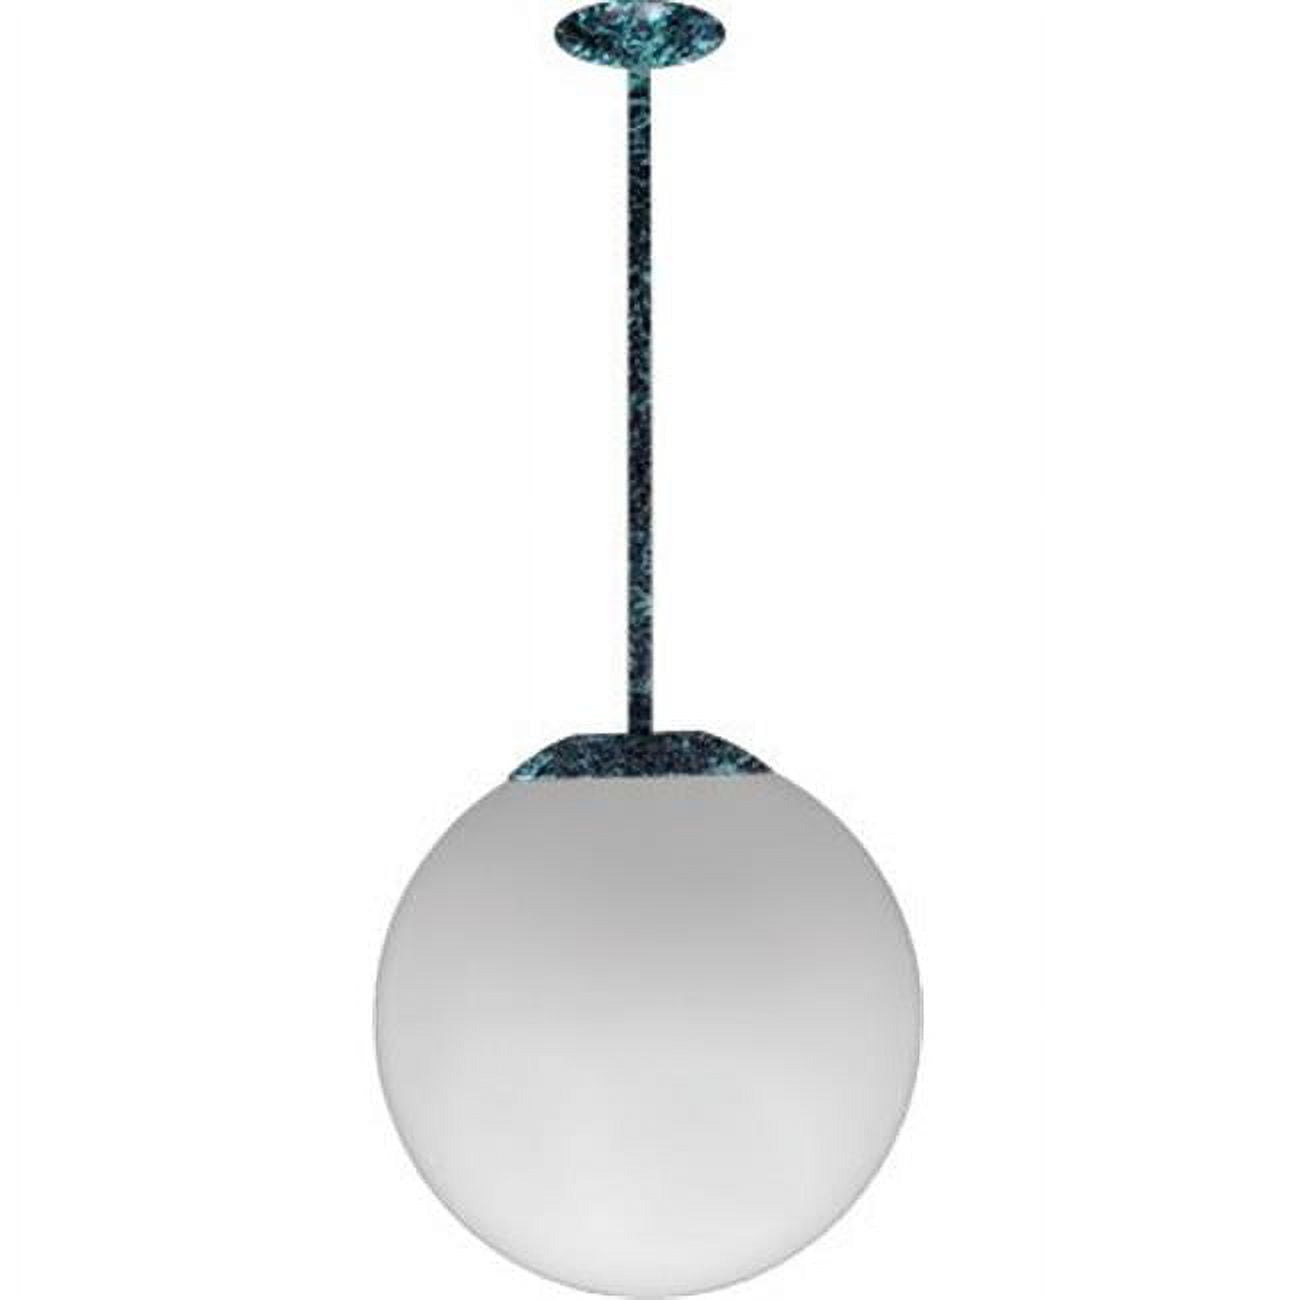 D7517-18-vg 18 In. 120 V 70 Watts Ceiling Globe Fixture 18 In. Drop With High Pressure Sodium Lamp, Verde Green